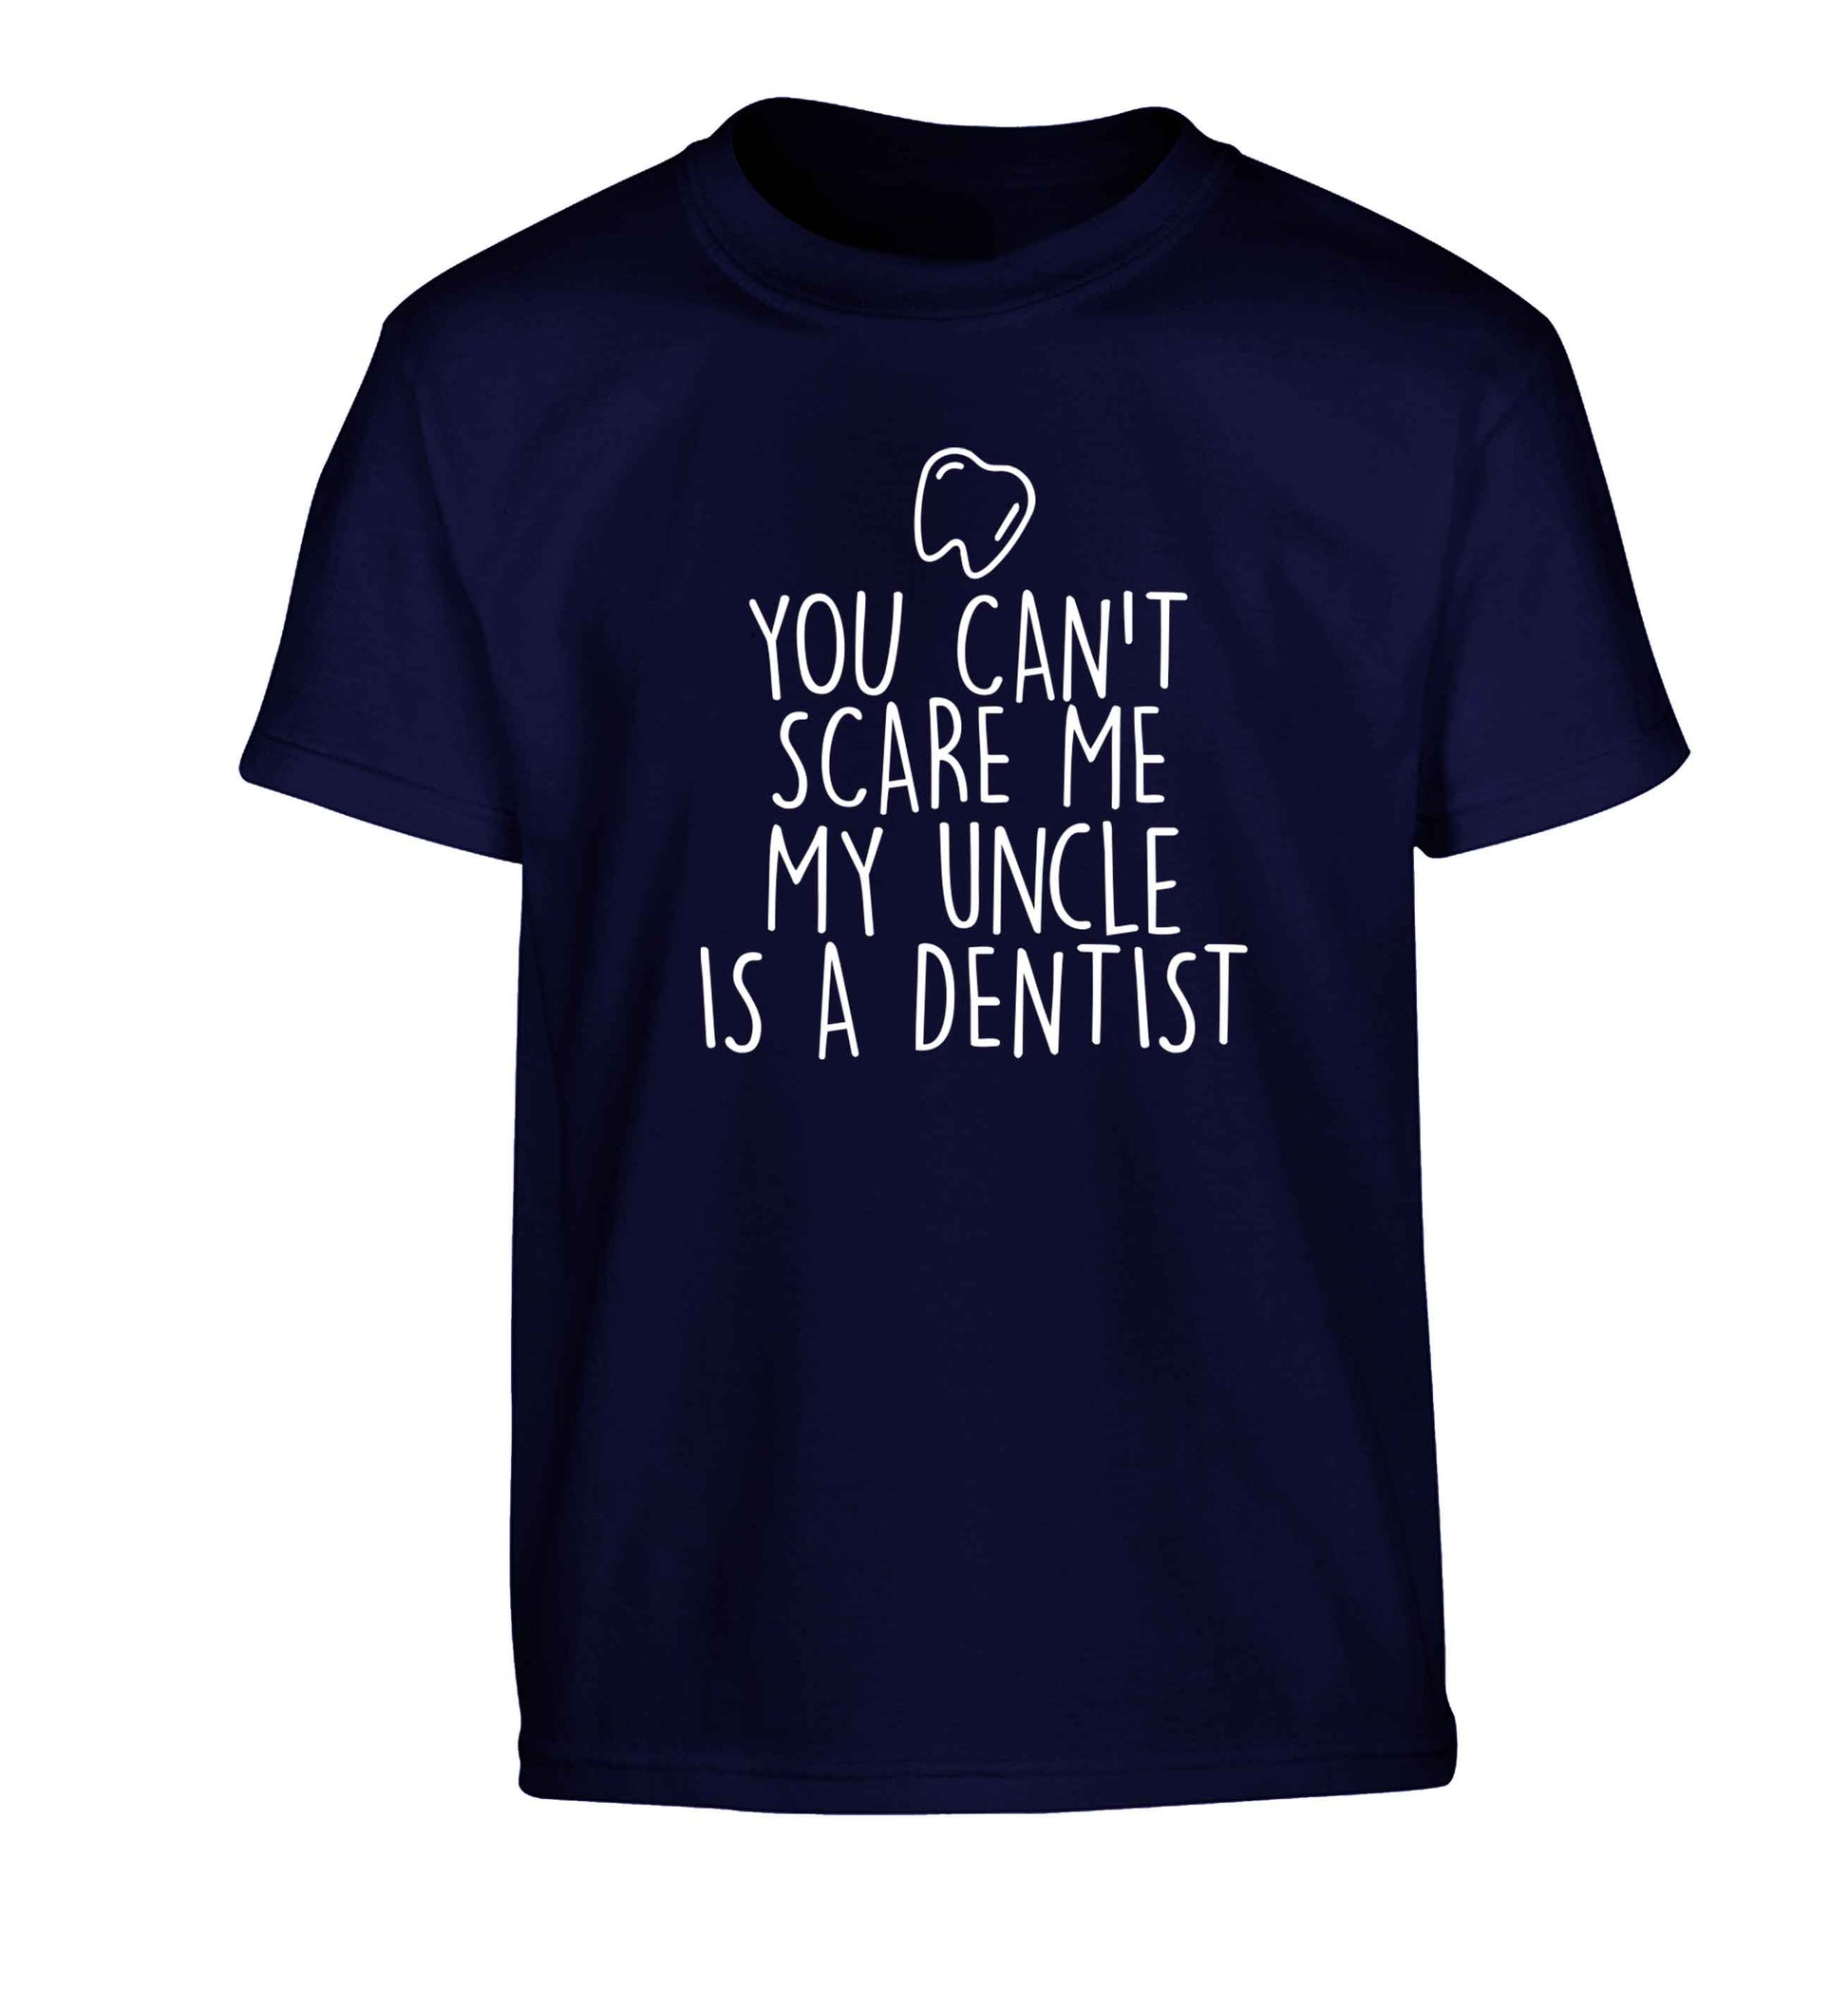 You can't scare me my uncle is a dentist Children's navy Tshirt 12-13 Years